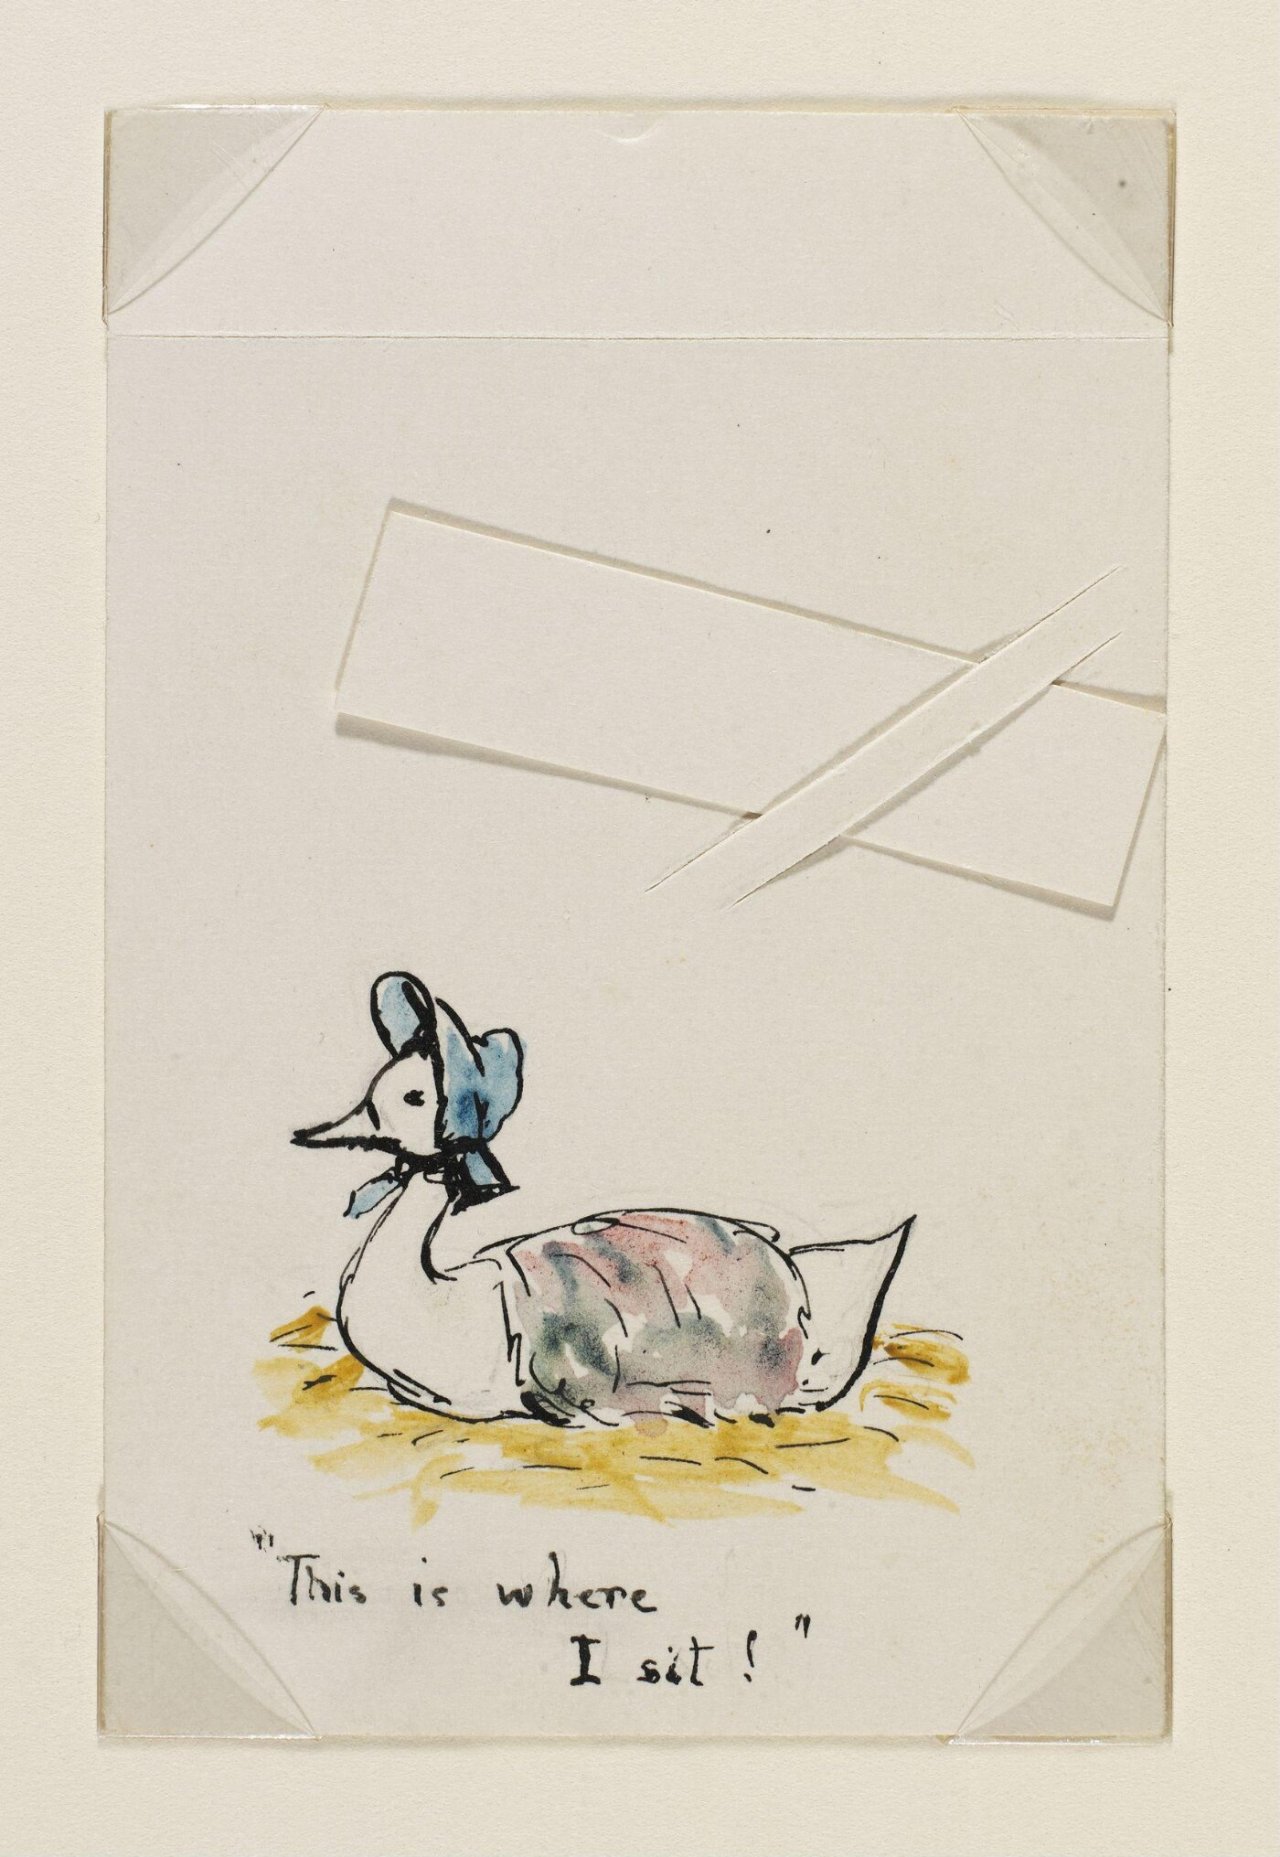 Place cards, drawn by Beatrix Potter (1866-1943)   Melford Hall, Long Melford, Suffolk, was the home of Beatrix Potters (1866-1943) cousin Ethel Hyde-Parker. Beatrix visited many times with her entourage of pet animals as a break from London. She liked to try her tales out on the young children there to see their reactions. This dinner card is part of a set of 15 produced by Beatrix for Melford Hall and was used by Ethel Hyde-Parker’s daughter, Stephanie. Names of guests could be inserted into the diagonal slots. [V&A] #beatrix potter#jemima puddleduck#peter rabbit #victoria and albert museum #illustrations#childrens books#place cards